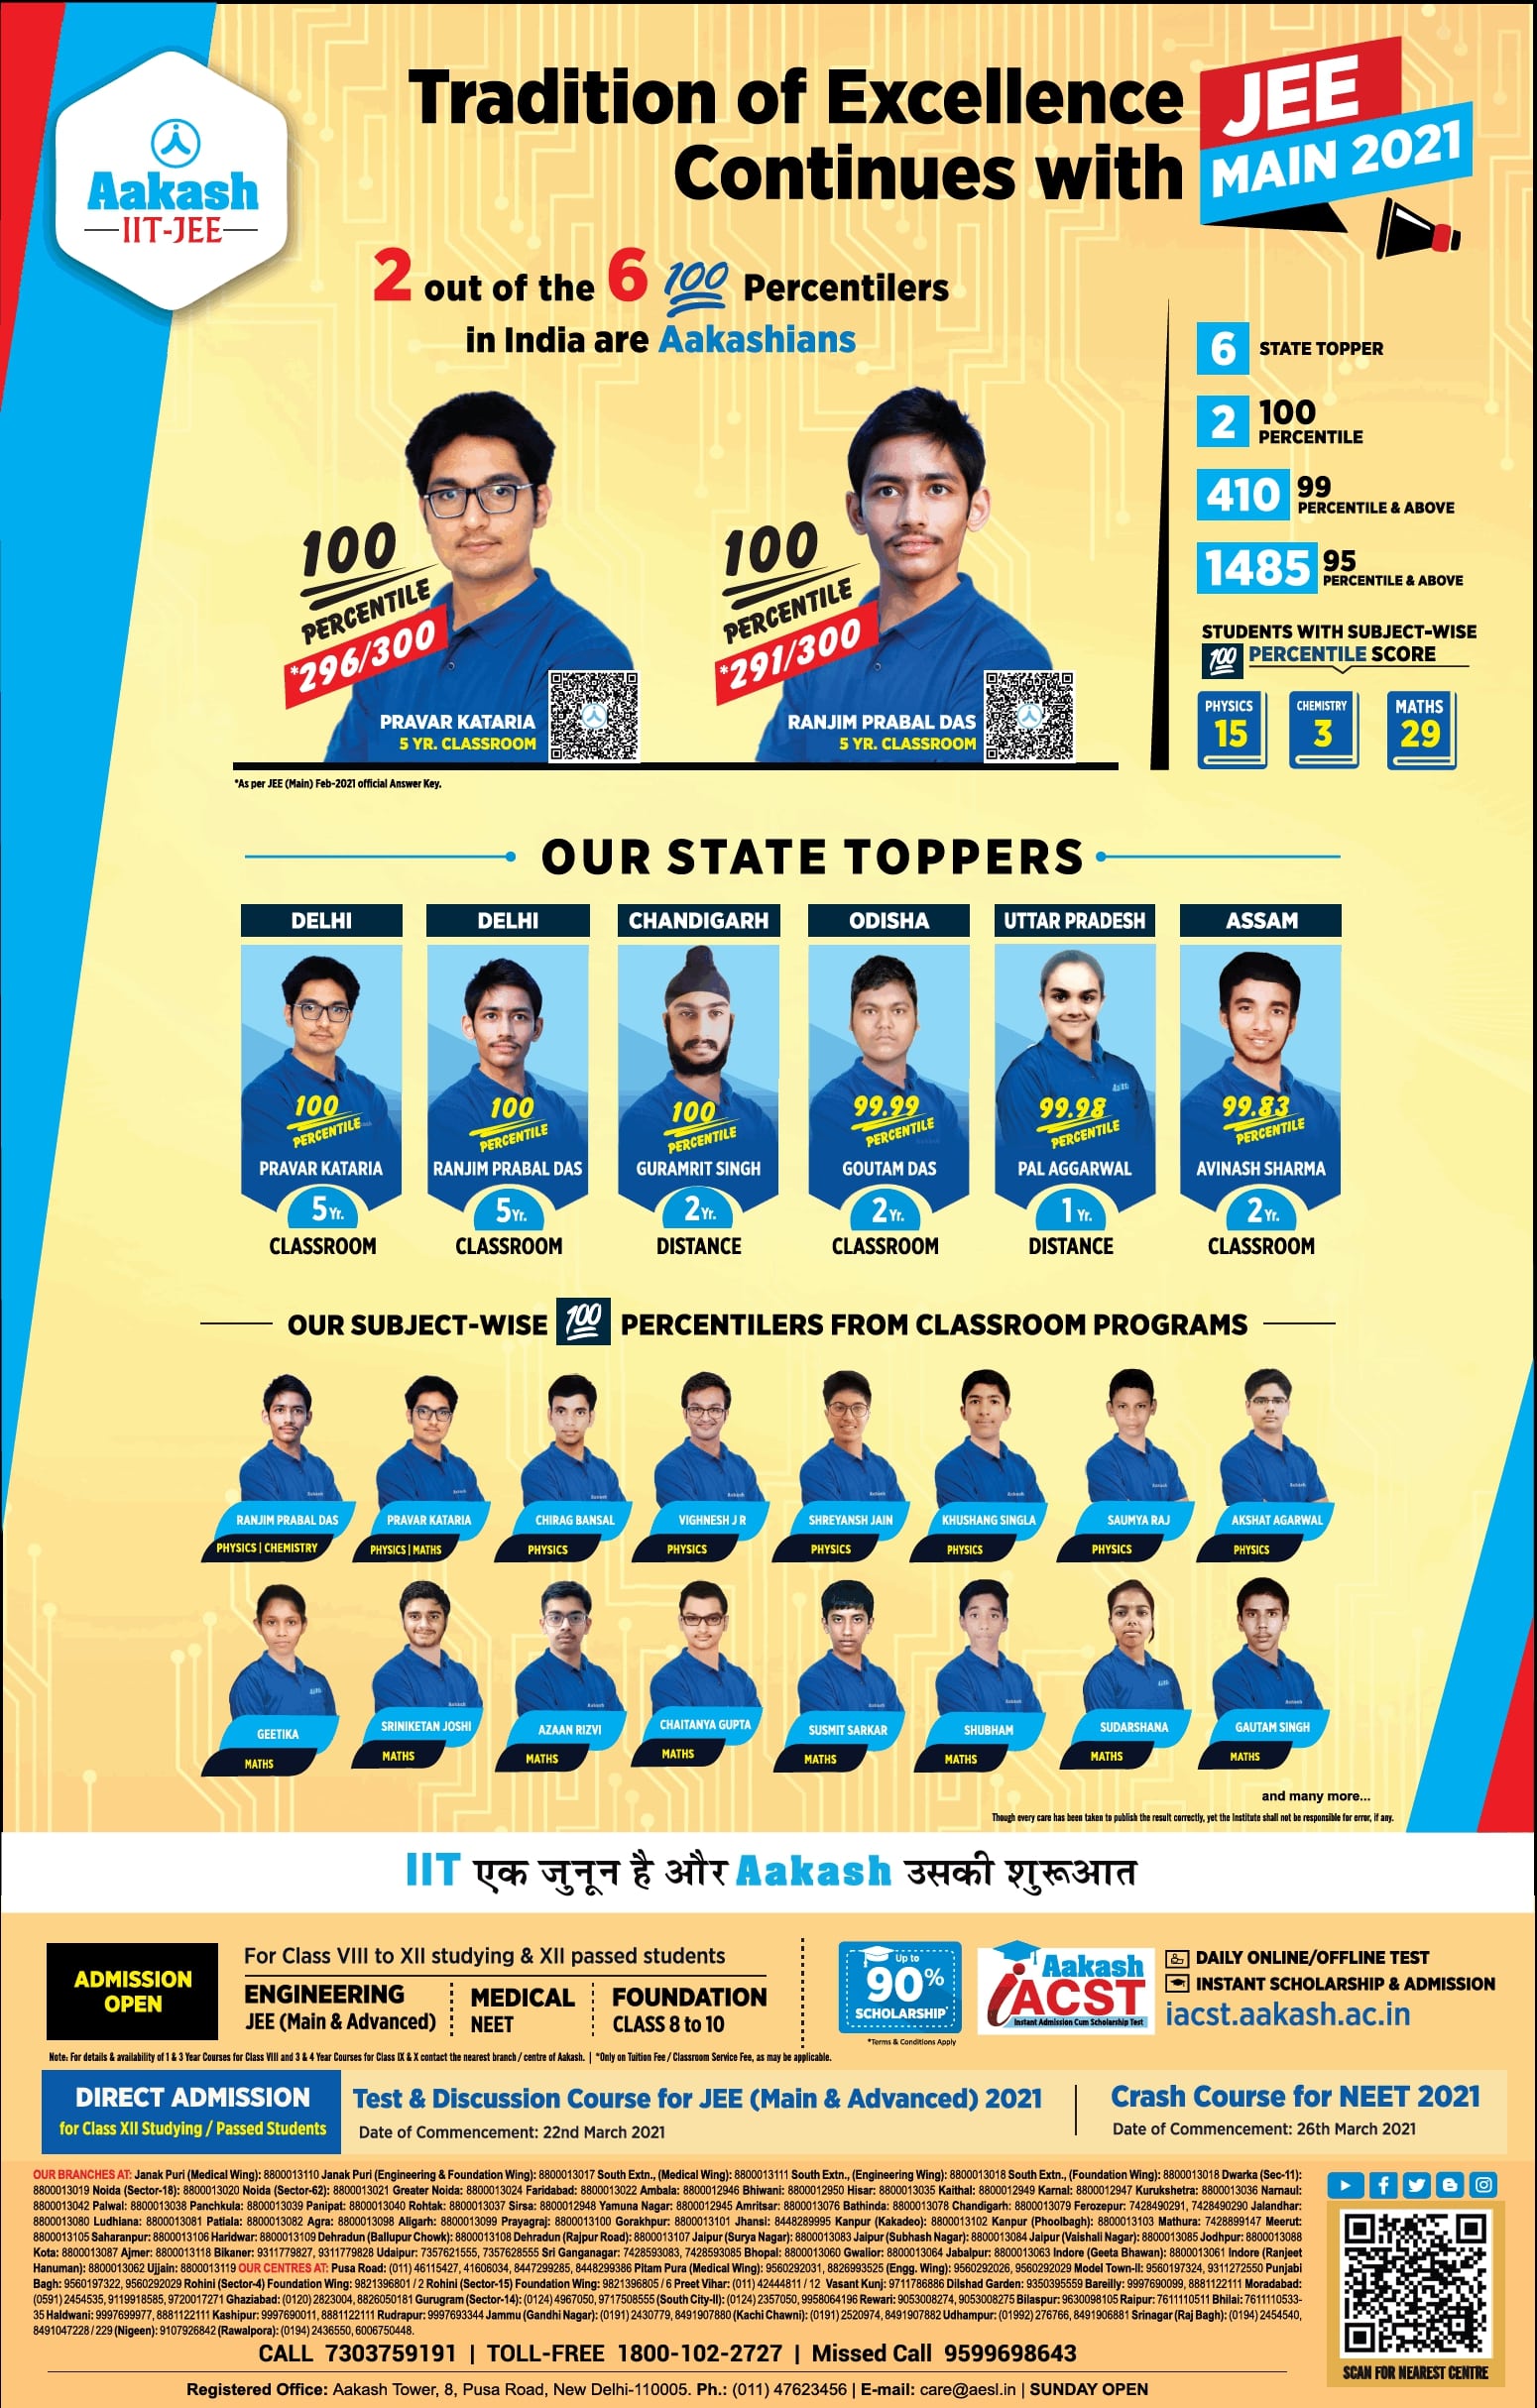 Aakash Iit Jee Tradition Of Excellence Continues With Jee Main 2021 Ad